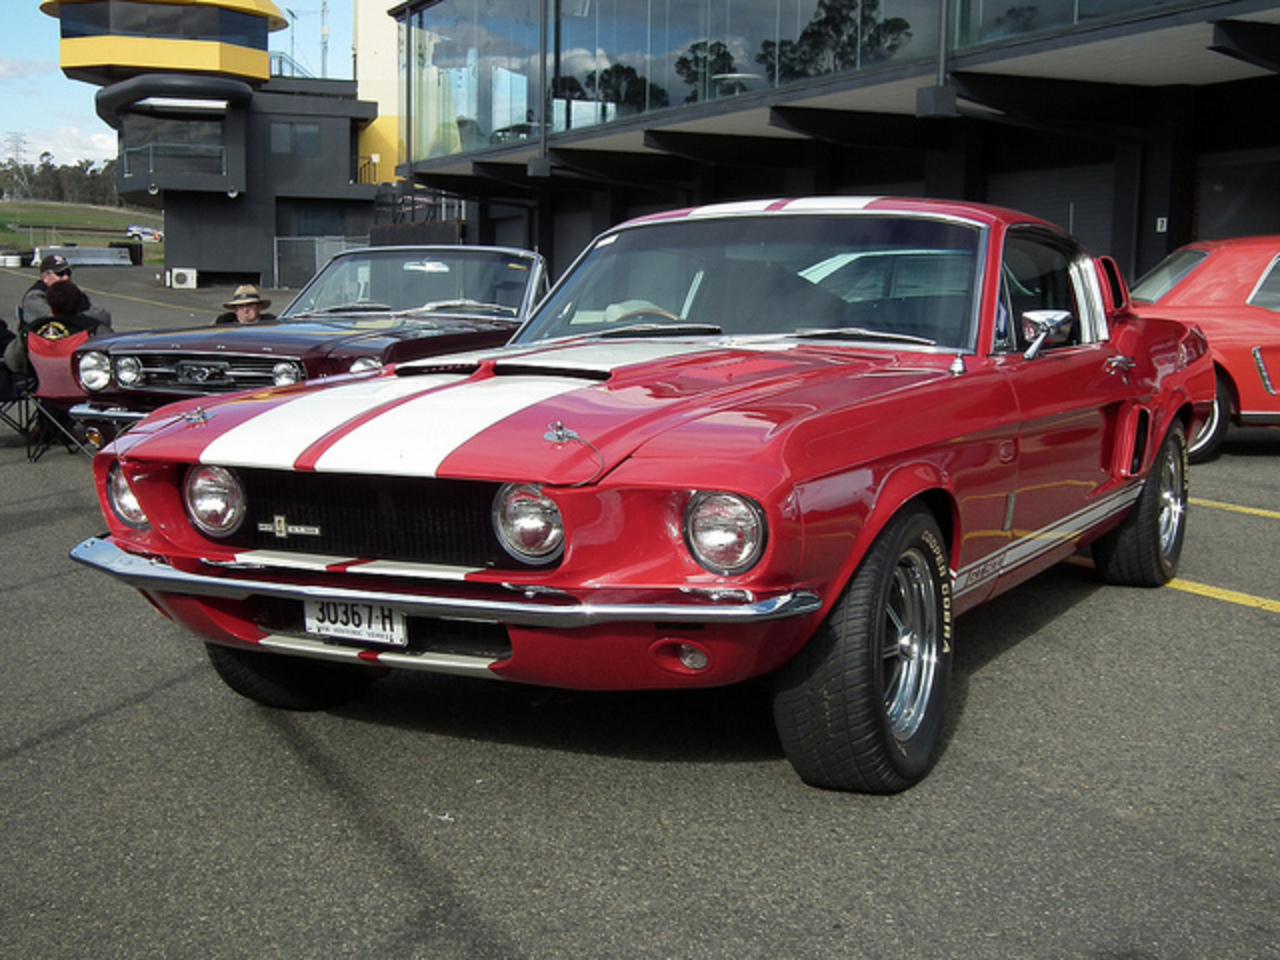 1967 Ford Mustang Shelby GT500 coupe | Flickr - Photo Sharing!